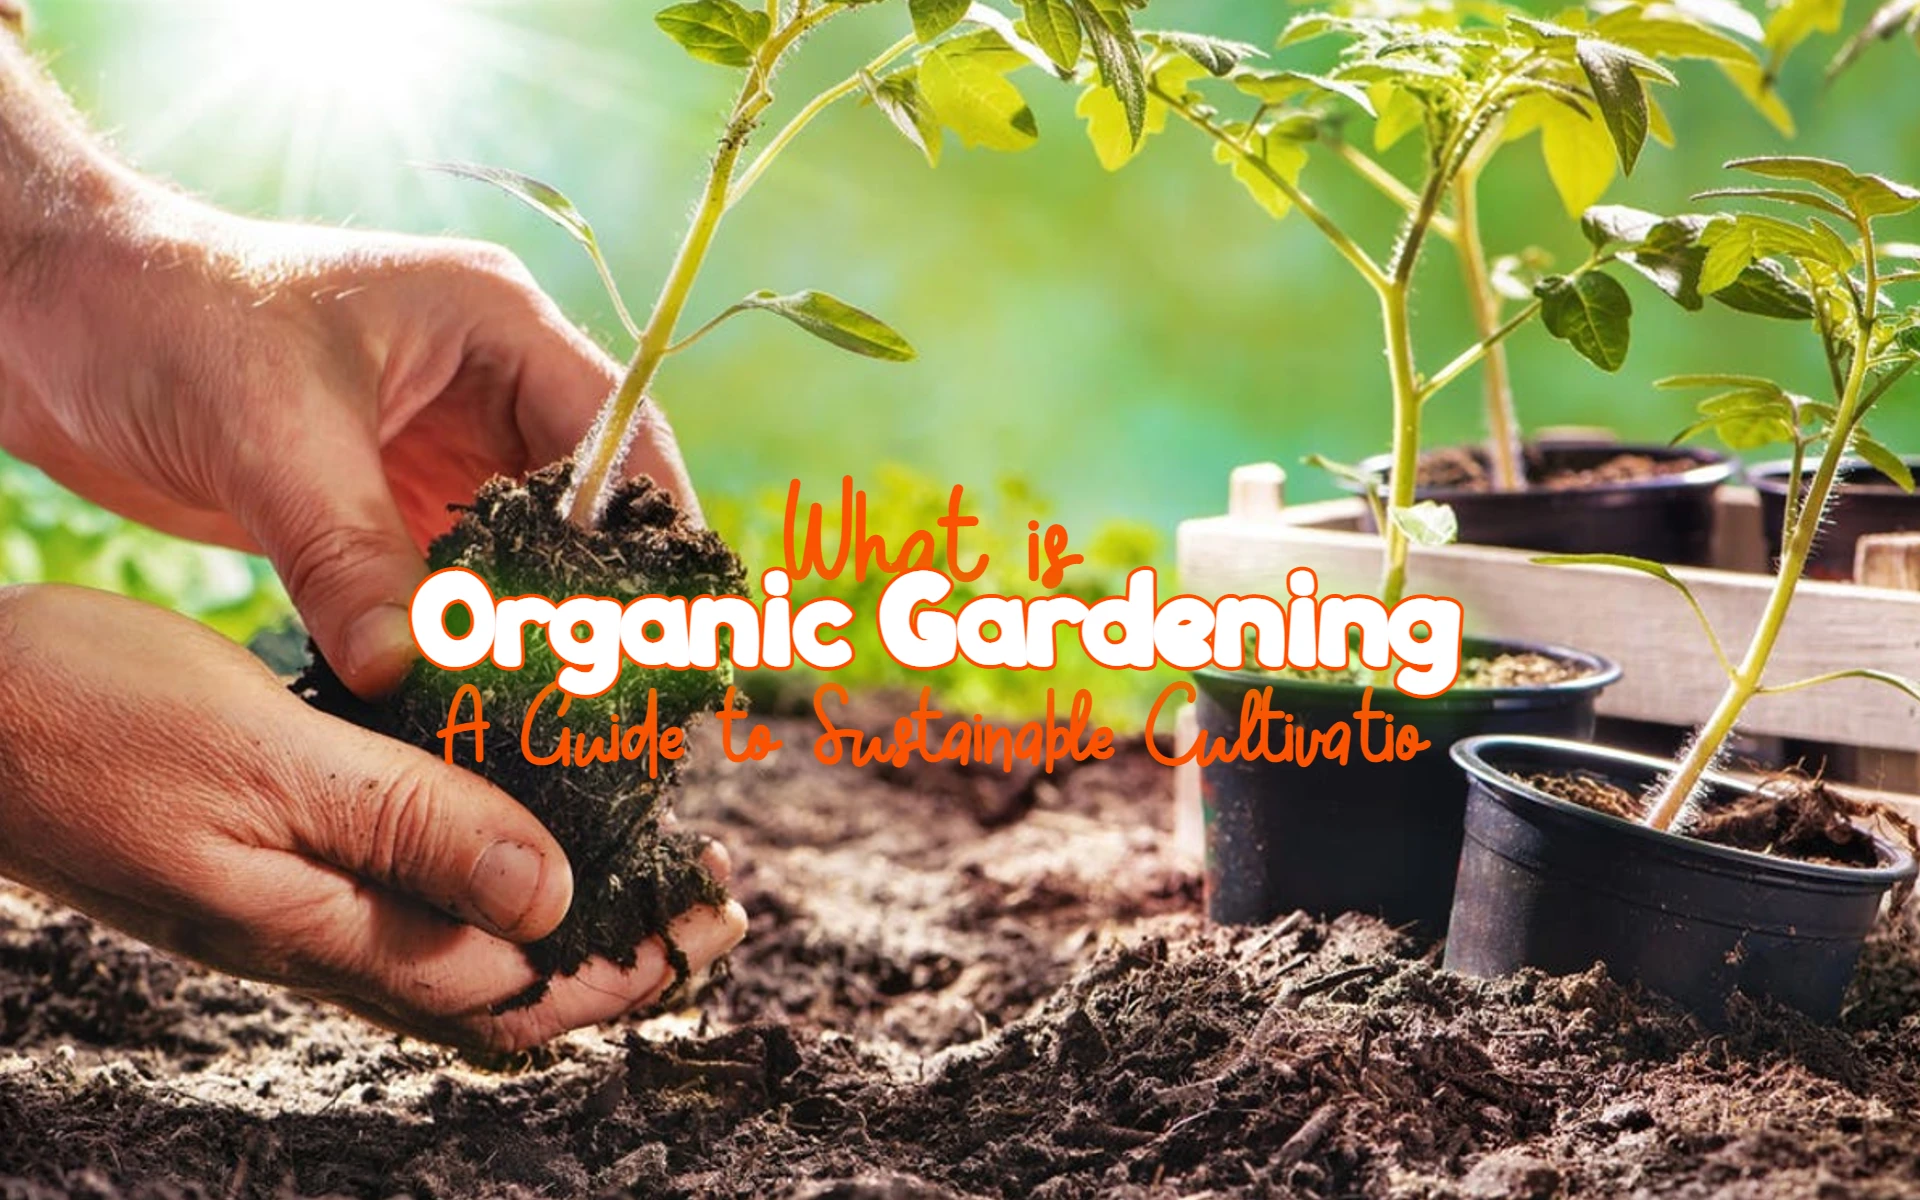 Organic Gardening A Guide to Sustainable Cultivation